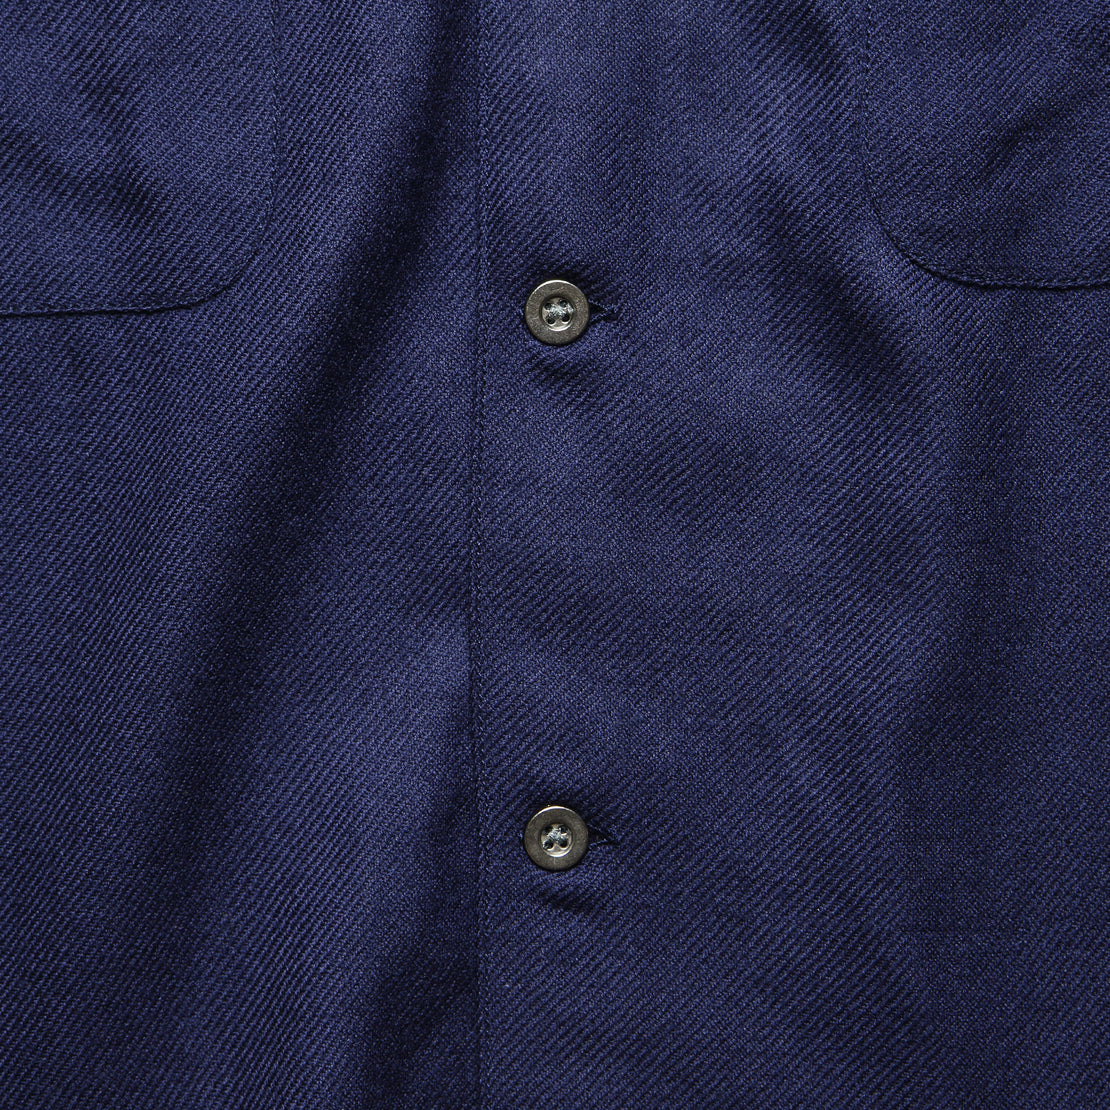 Worsted Wool Workshirt - Navy - Corridor - STAG Provisions - Outerwear - Coat / Jacket